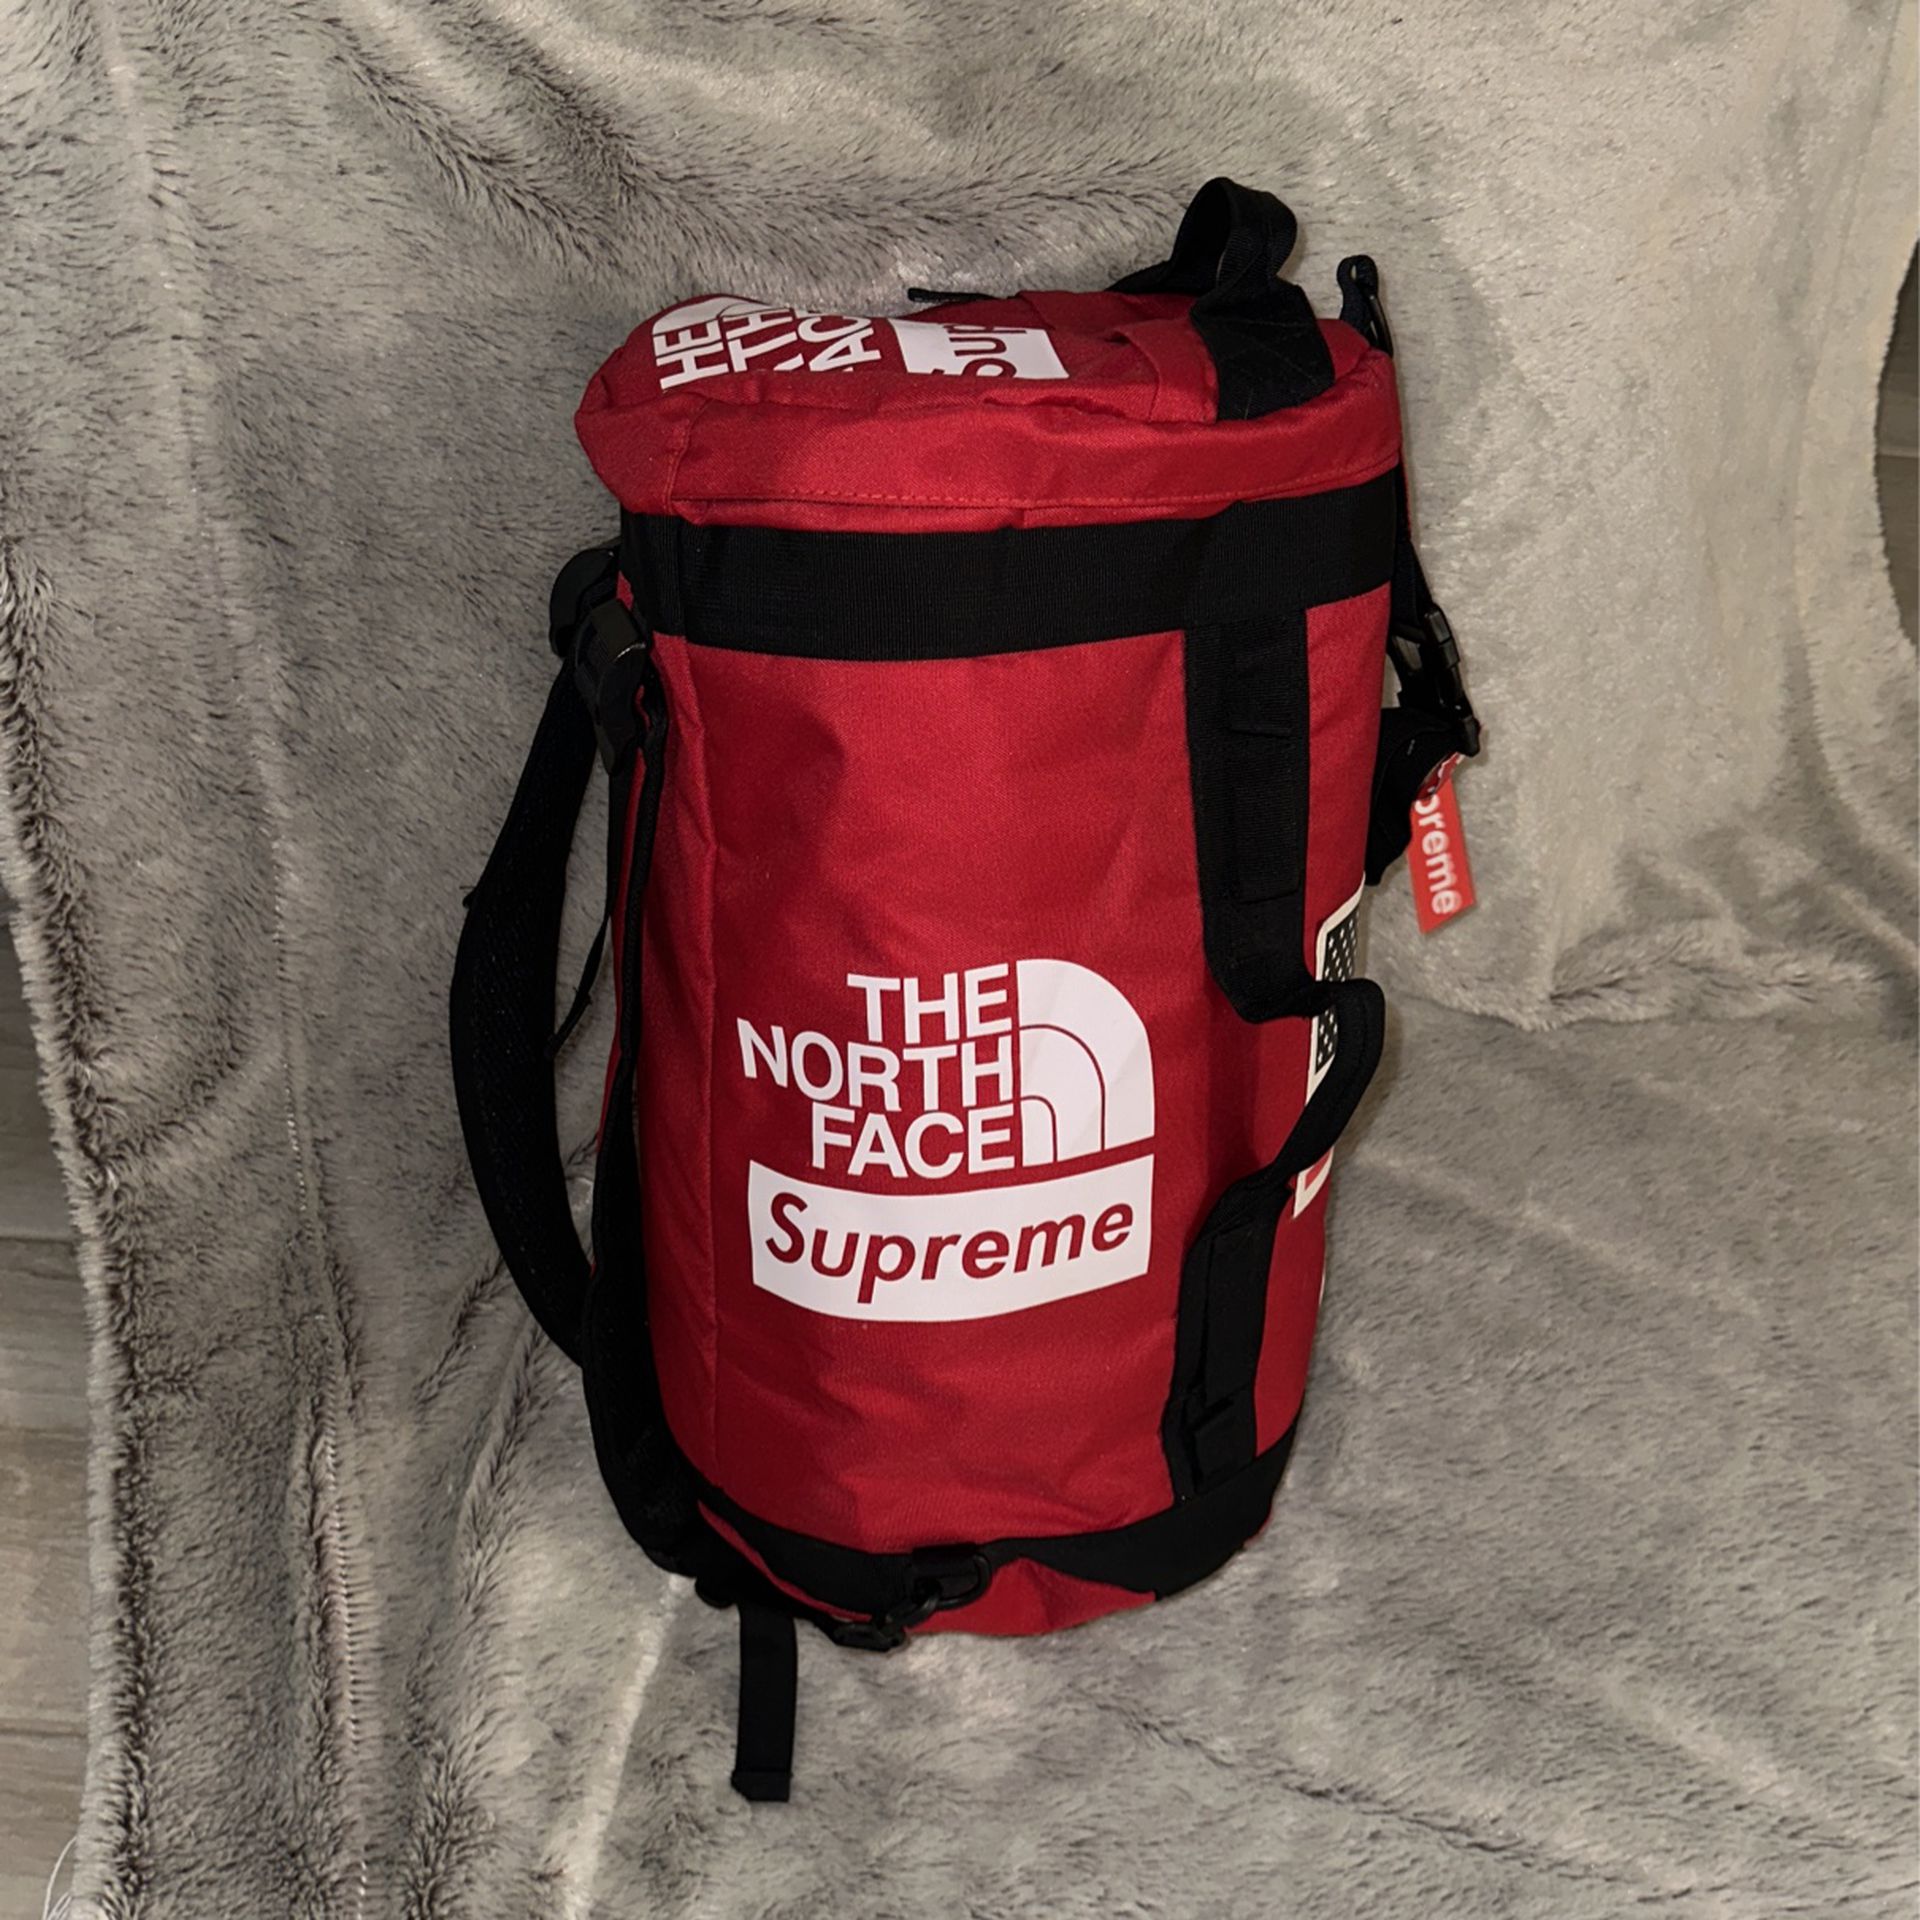 Supreme - The North Face Hiking Bag / Backpack - BRAND NEW